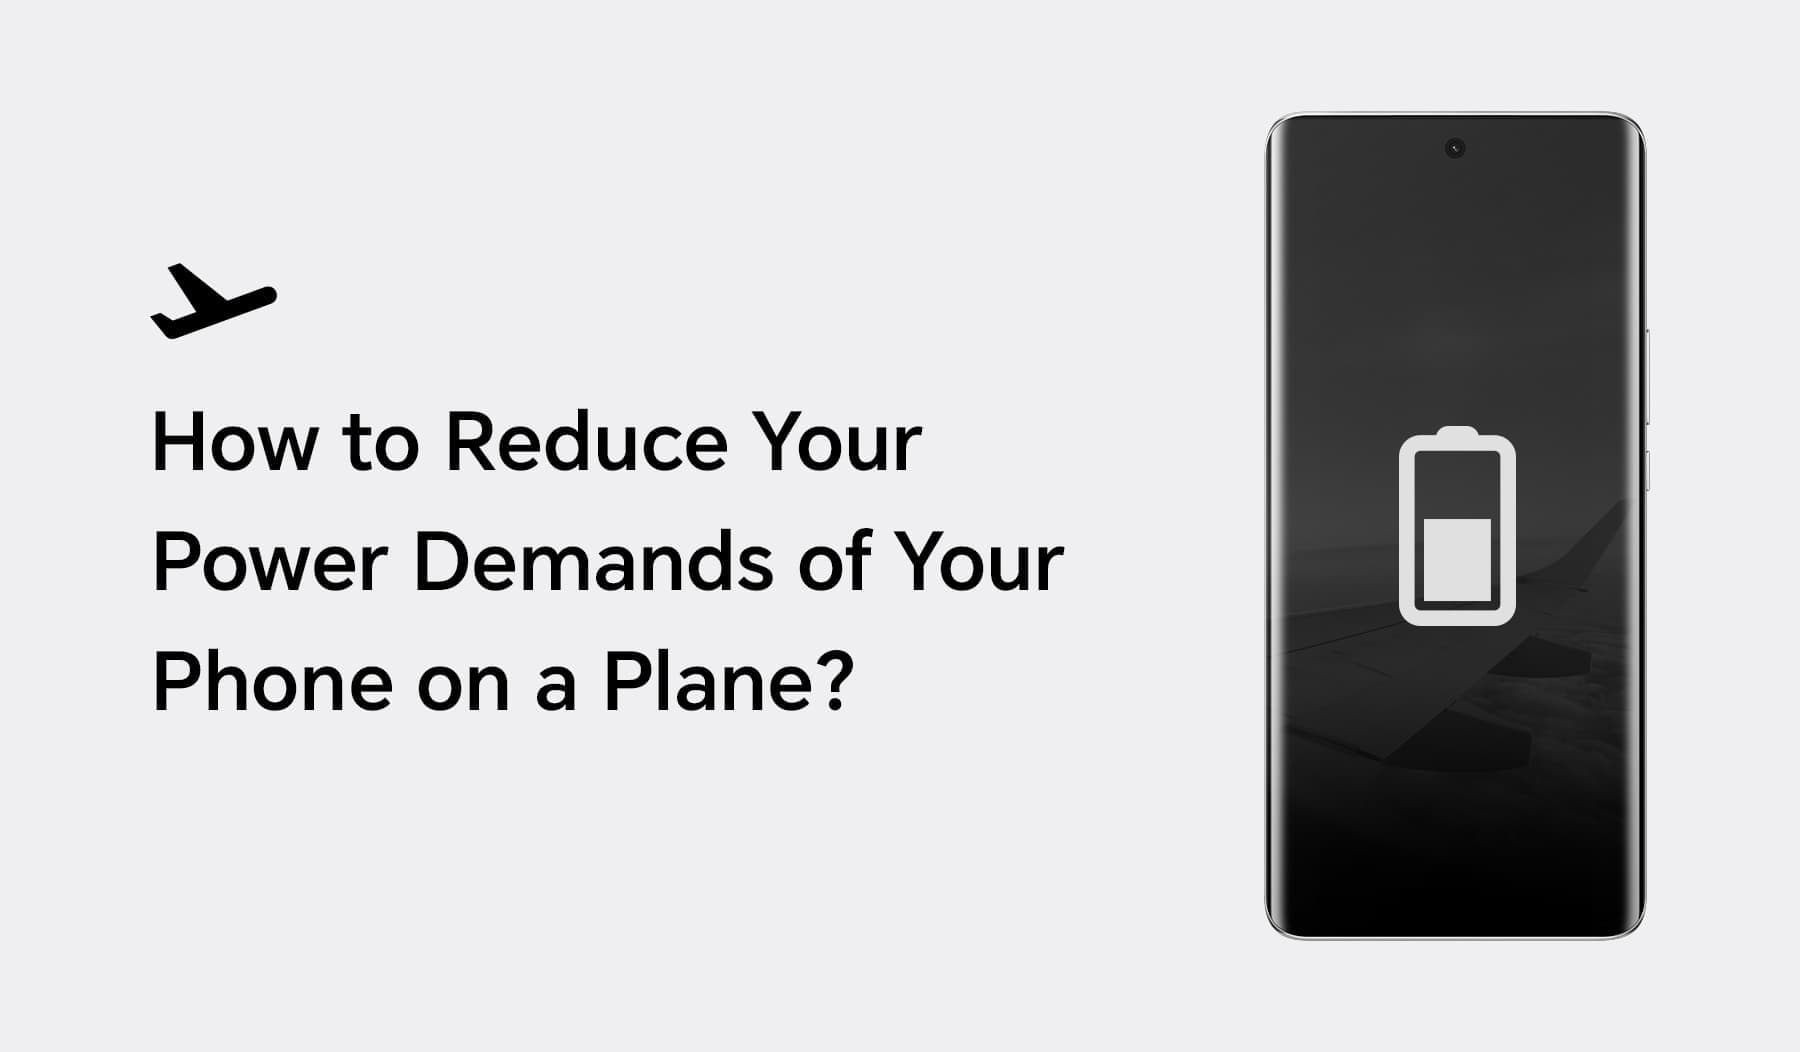 How to Reduce Your Power Demands of Your Phone on a Plane？